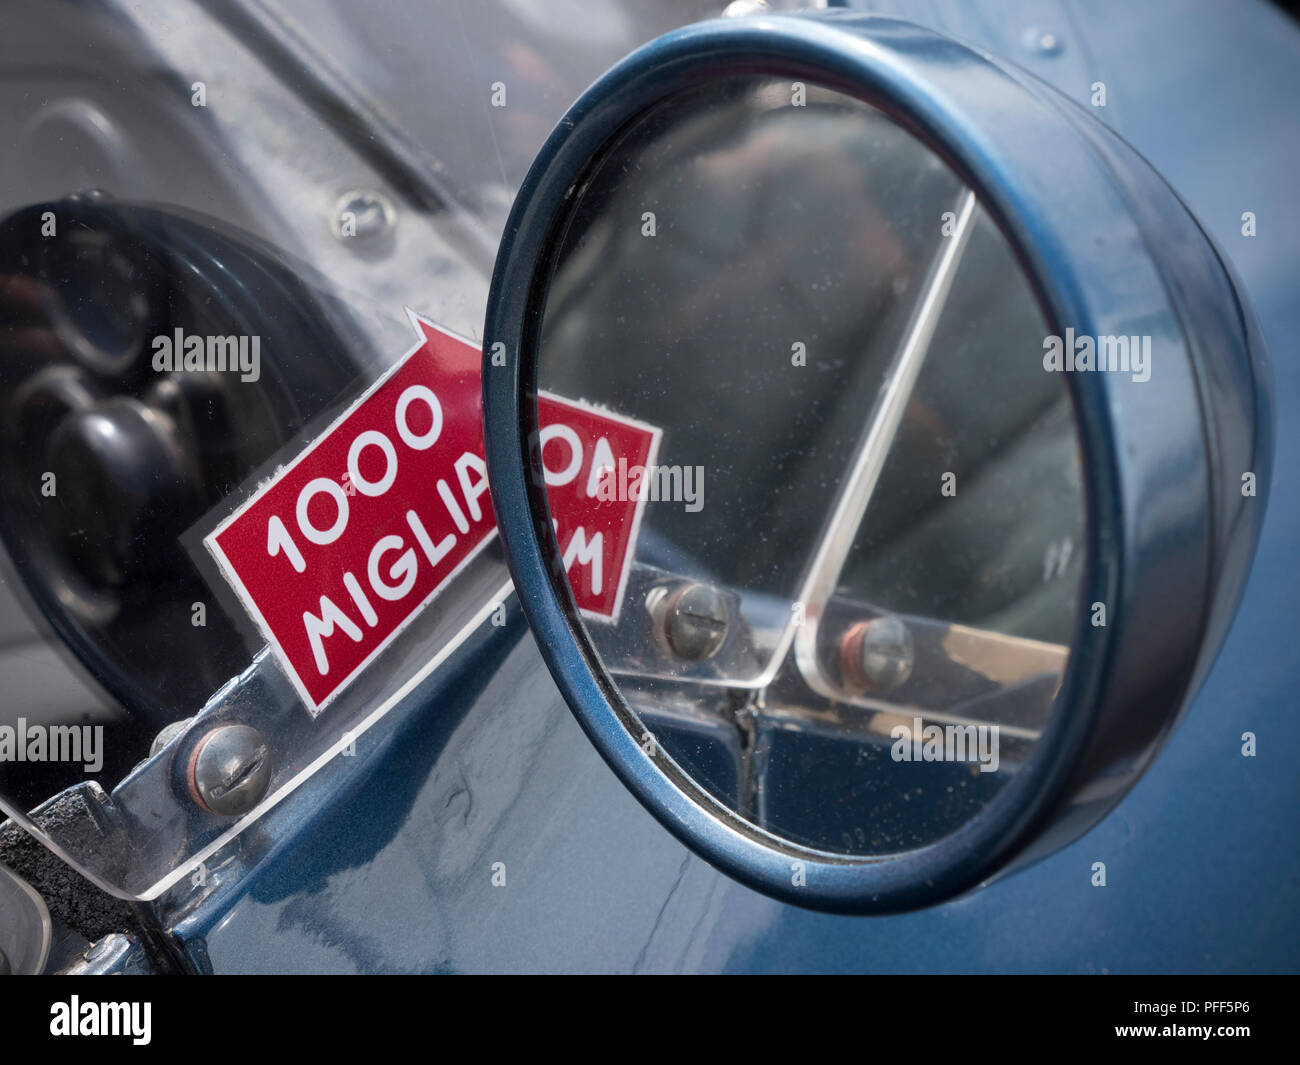 Page 2 - Jaguar D Type High Resolution Stock Photography and Images - Alamy